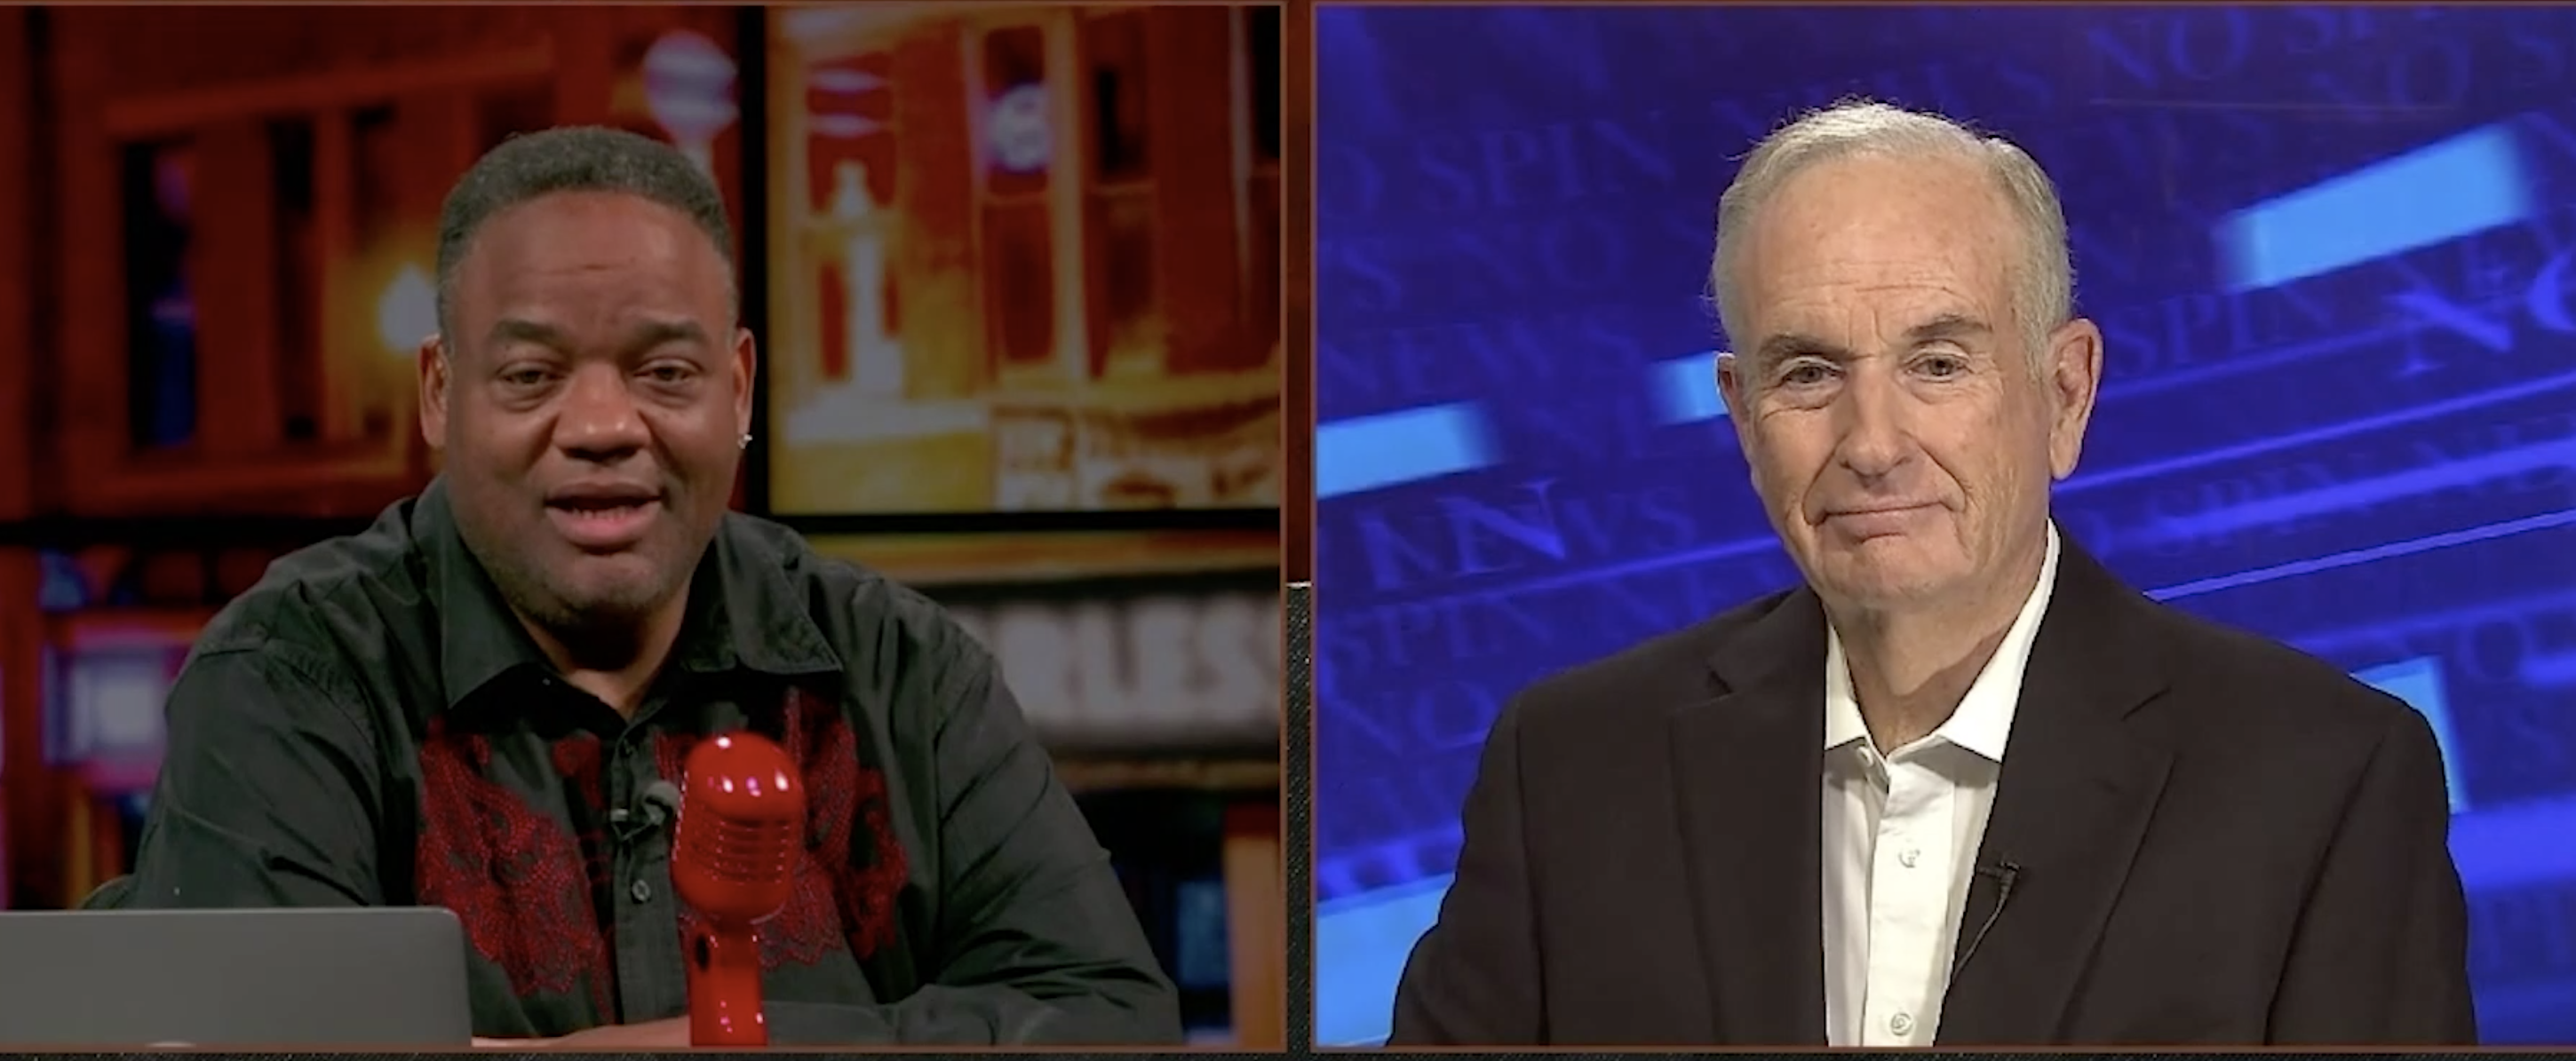 Watch: O'Reilly Discusses the Price of Celebrity with Jason Whitlock